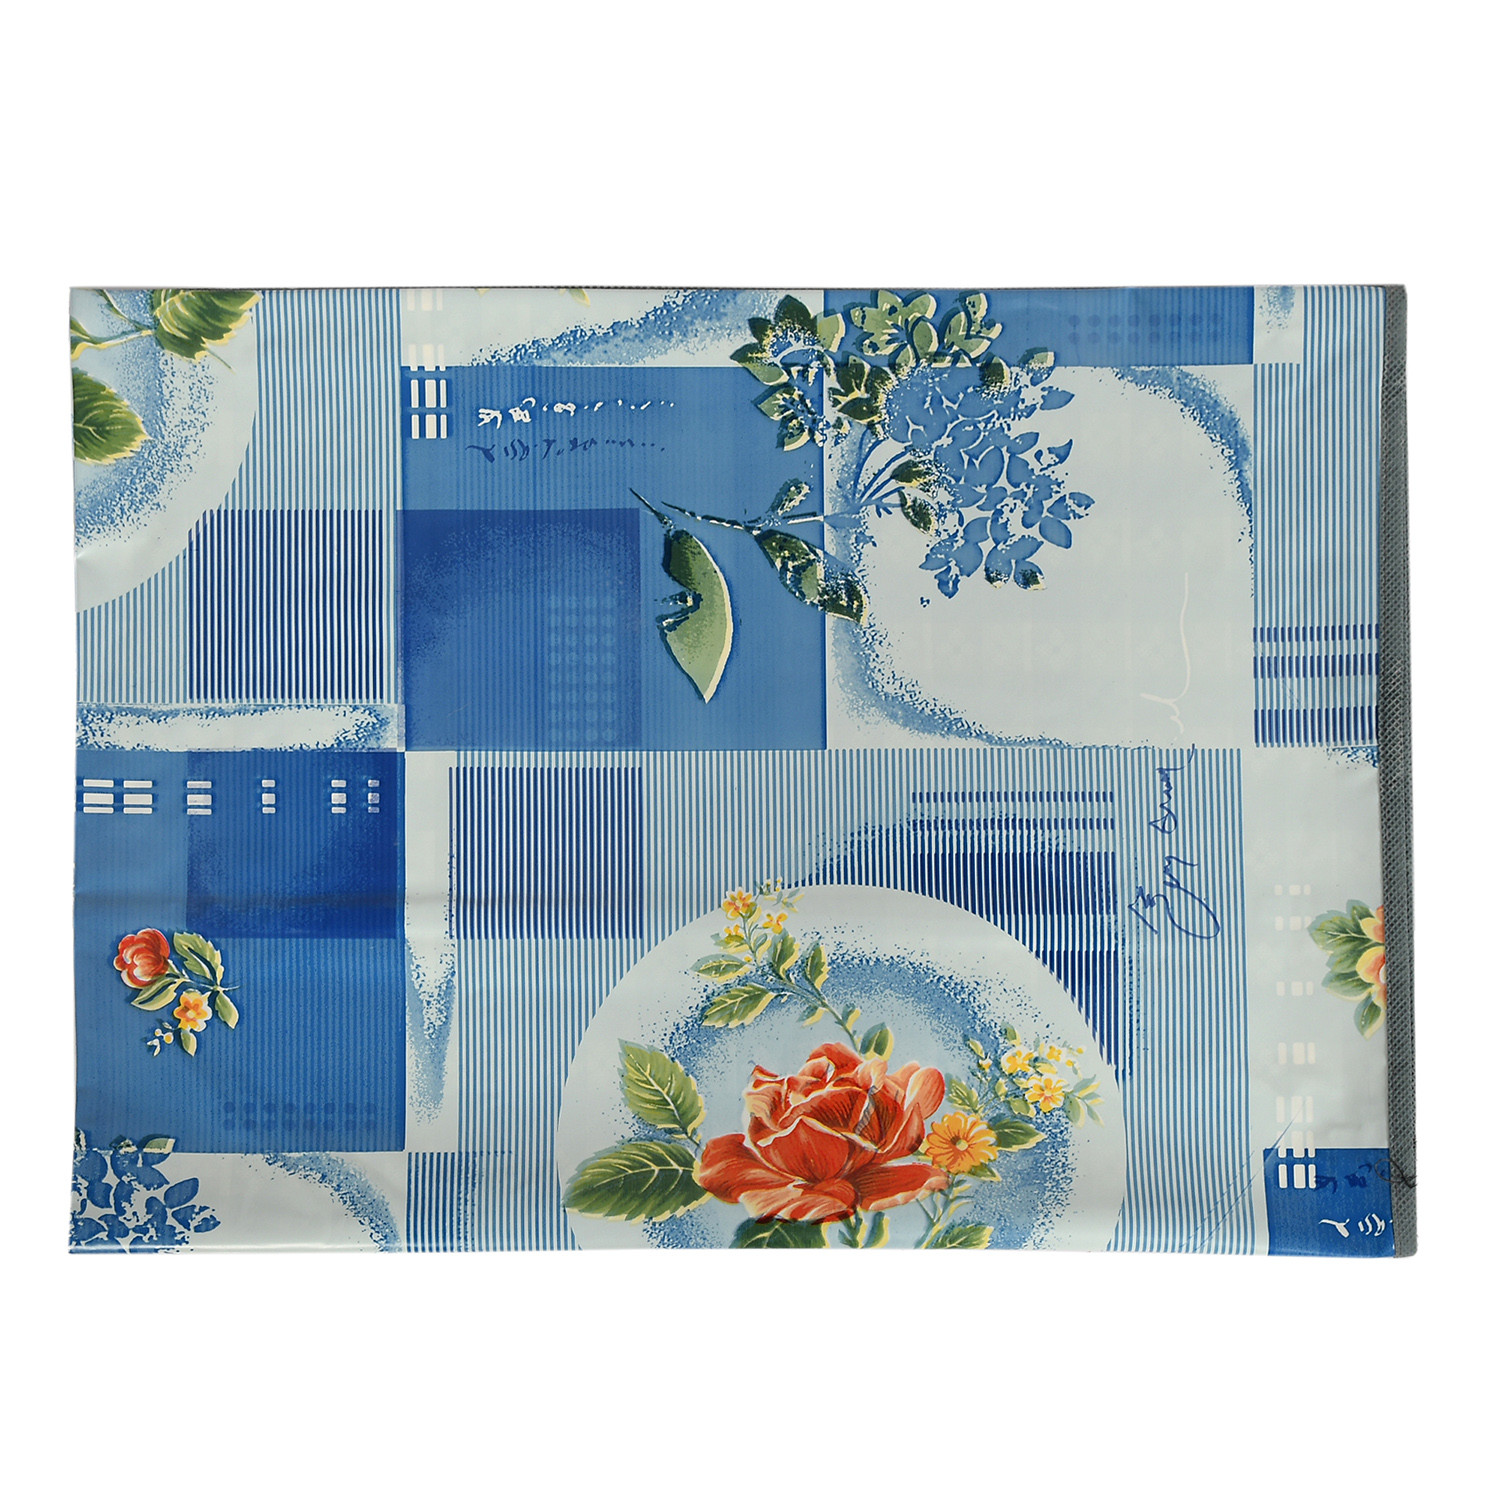 Kuber Industries PVC Floral Print Both Sided Bed Server Food Mat, Bedsheet Protector For Home 36